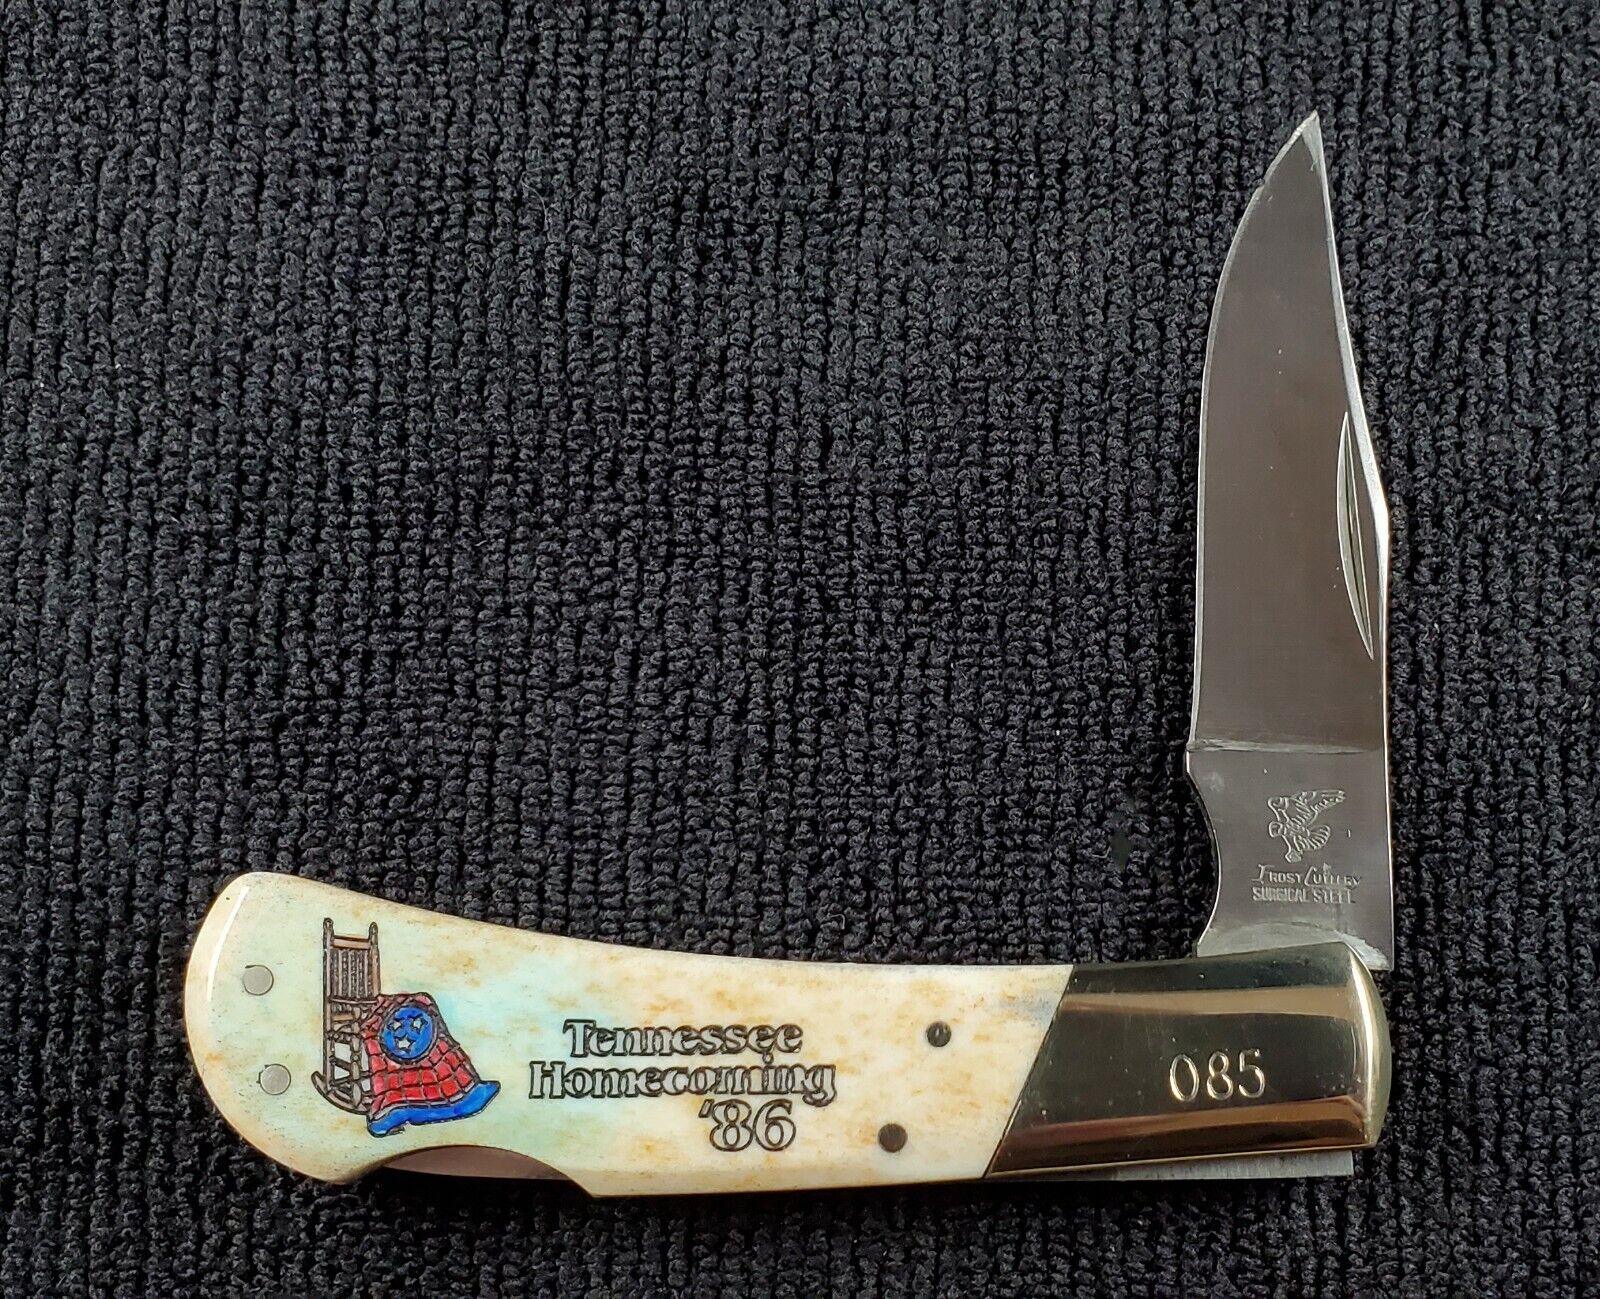 Vintage Frost Cutlery Japan 1986 Tennessee Homecoming Bone Handle Pocket Knife 